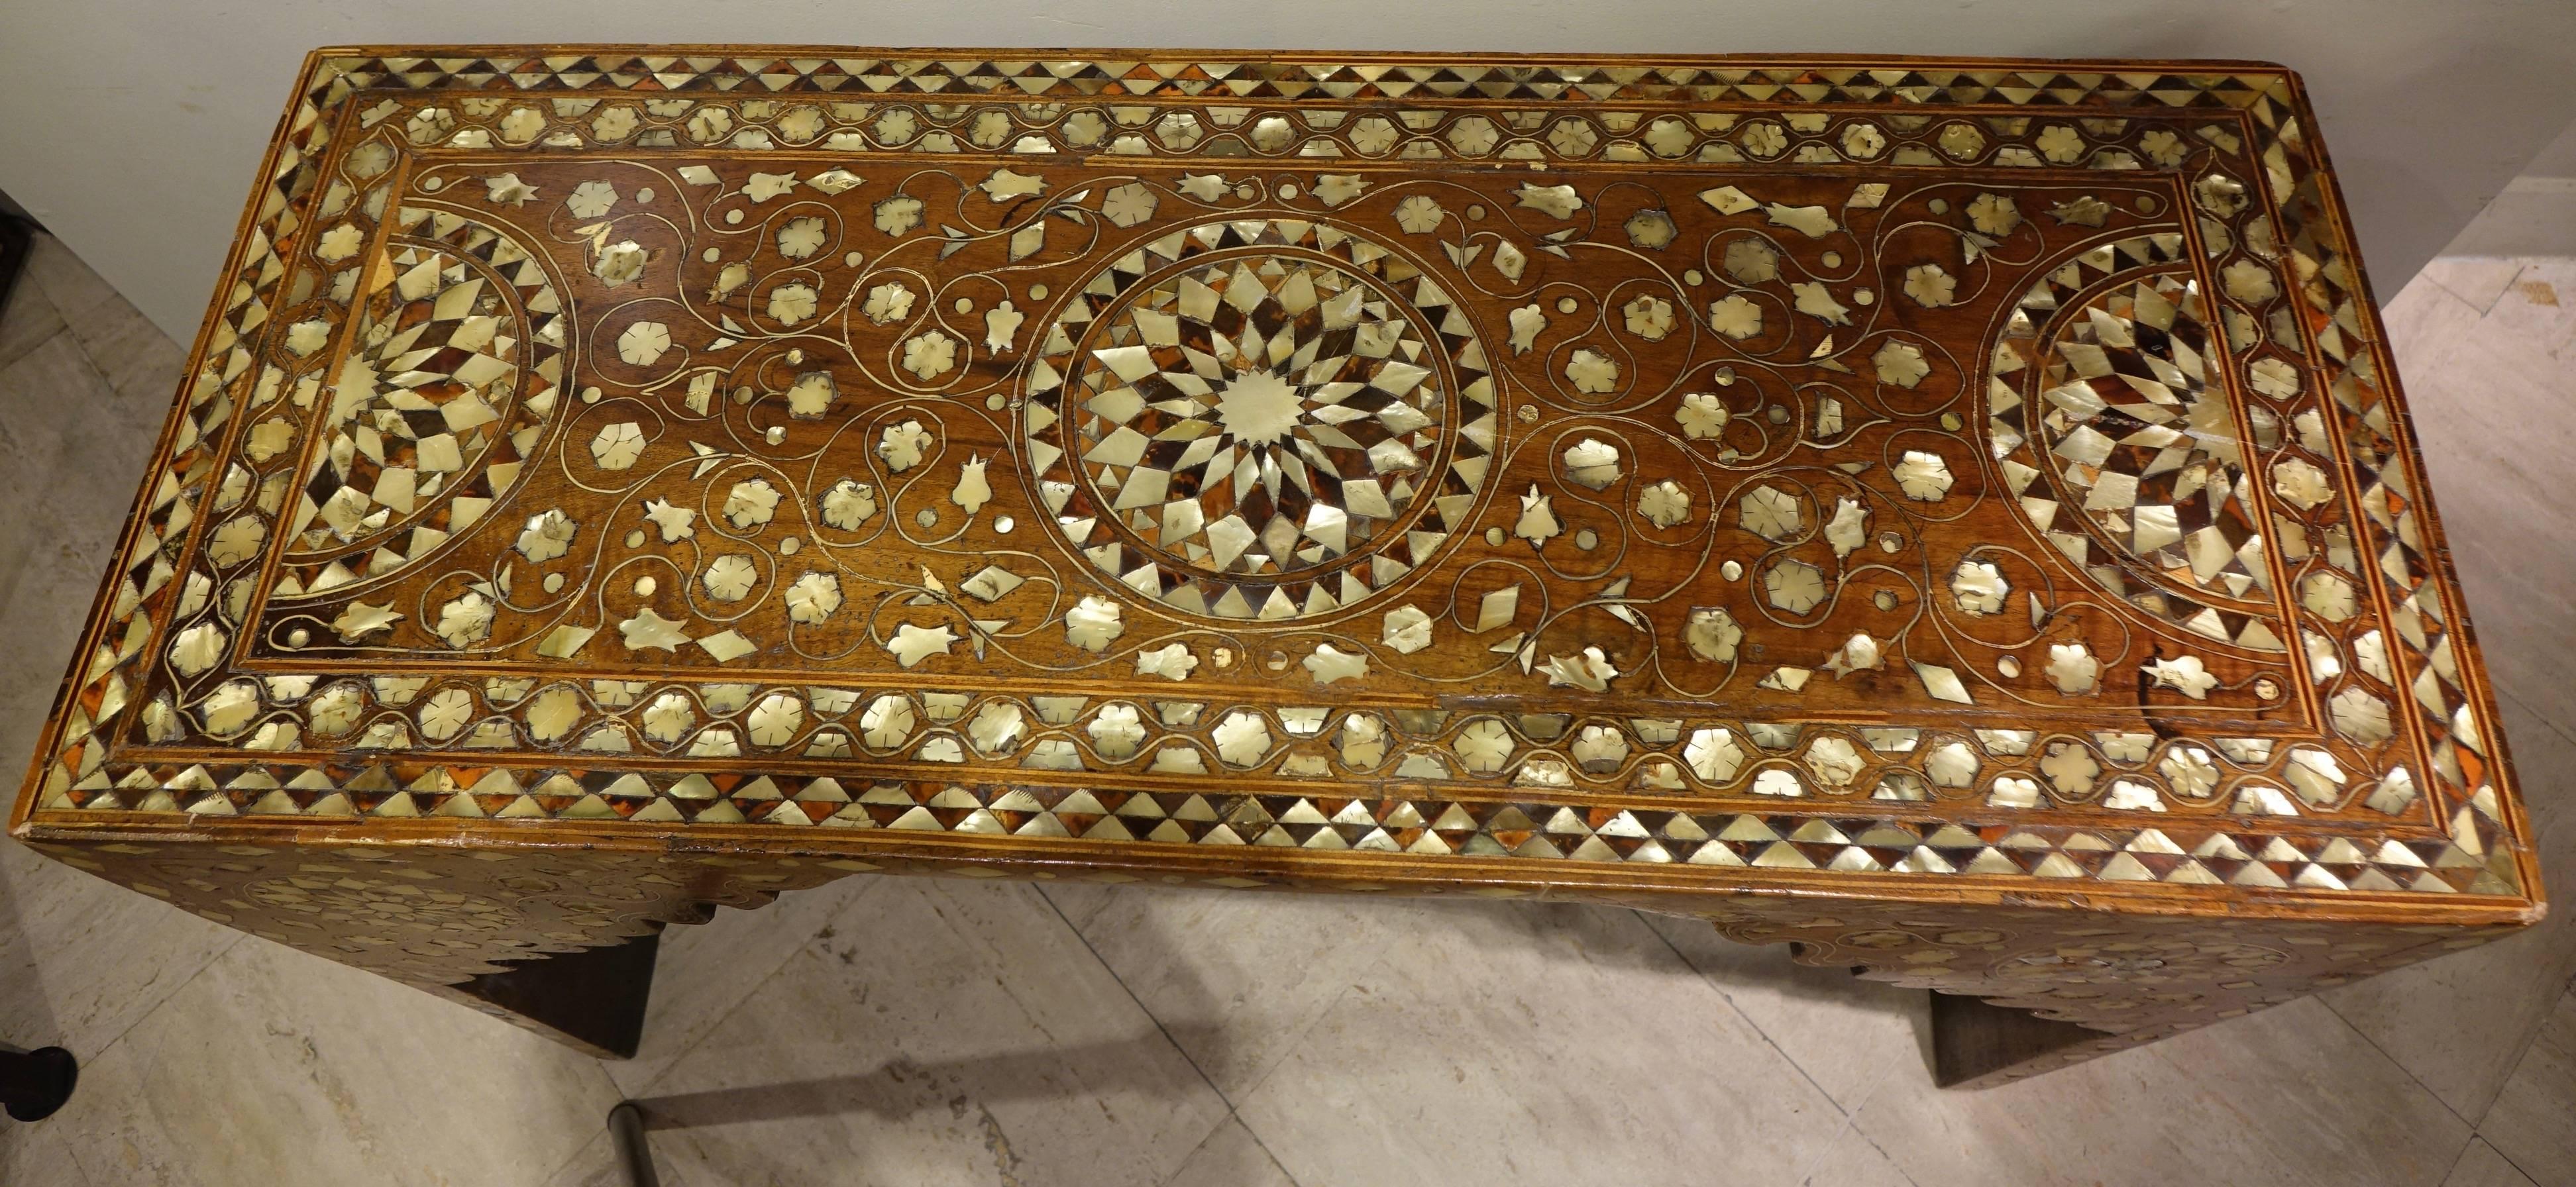 Rare writing table that can serve also as a wooden console, inlay with mother-of-pearl and shell.
Beautiful decor on four sides made of geometric compositions and trees of life.
Syria, Ottoman Empire, 19th century.